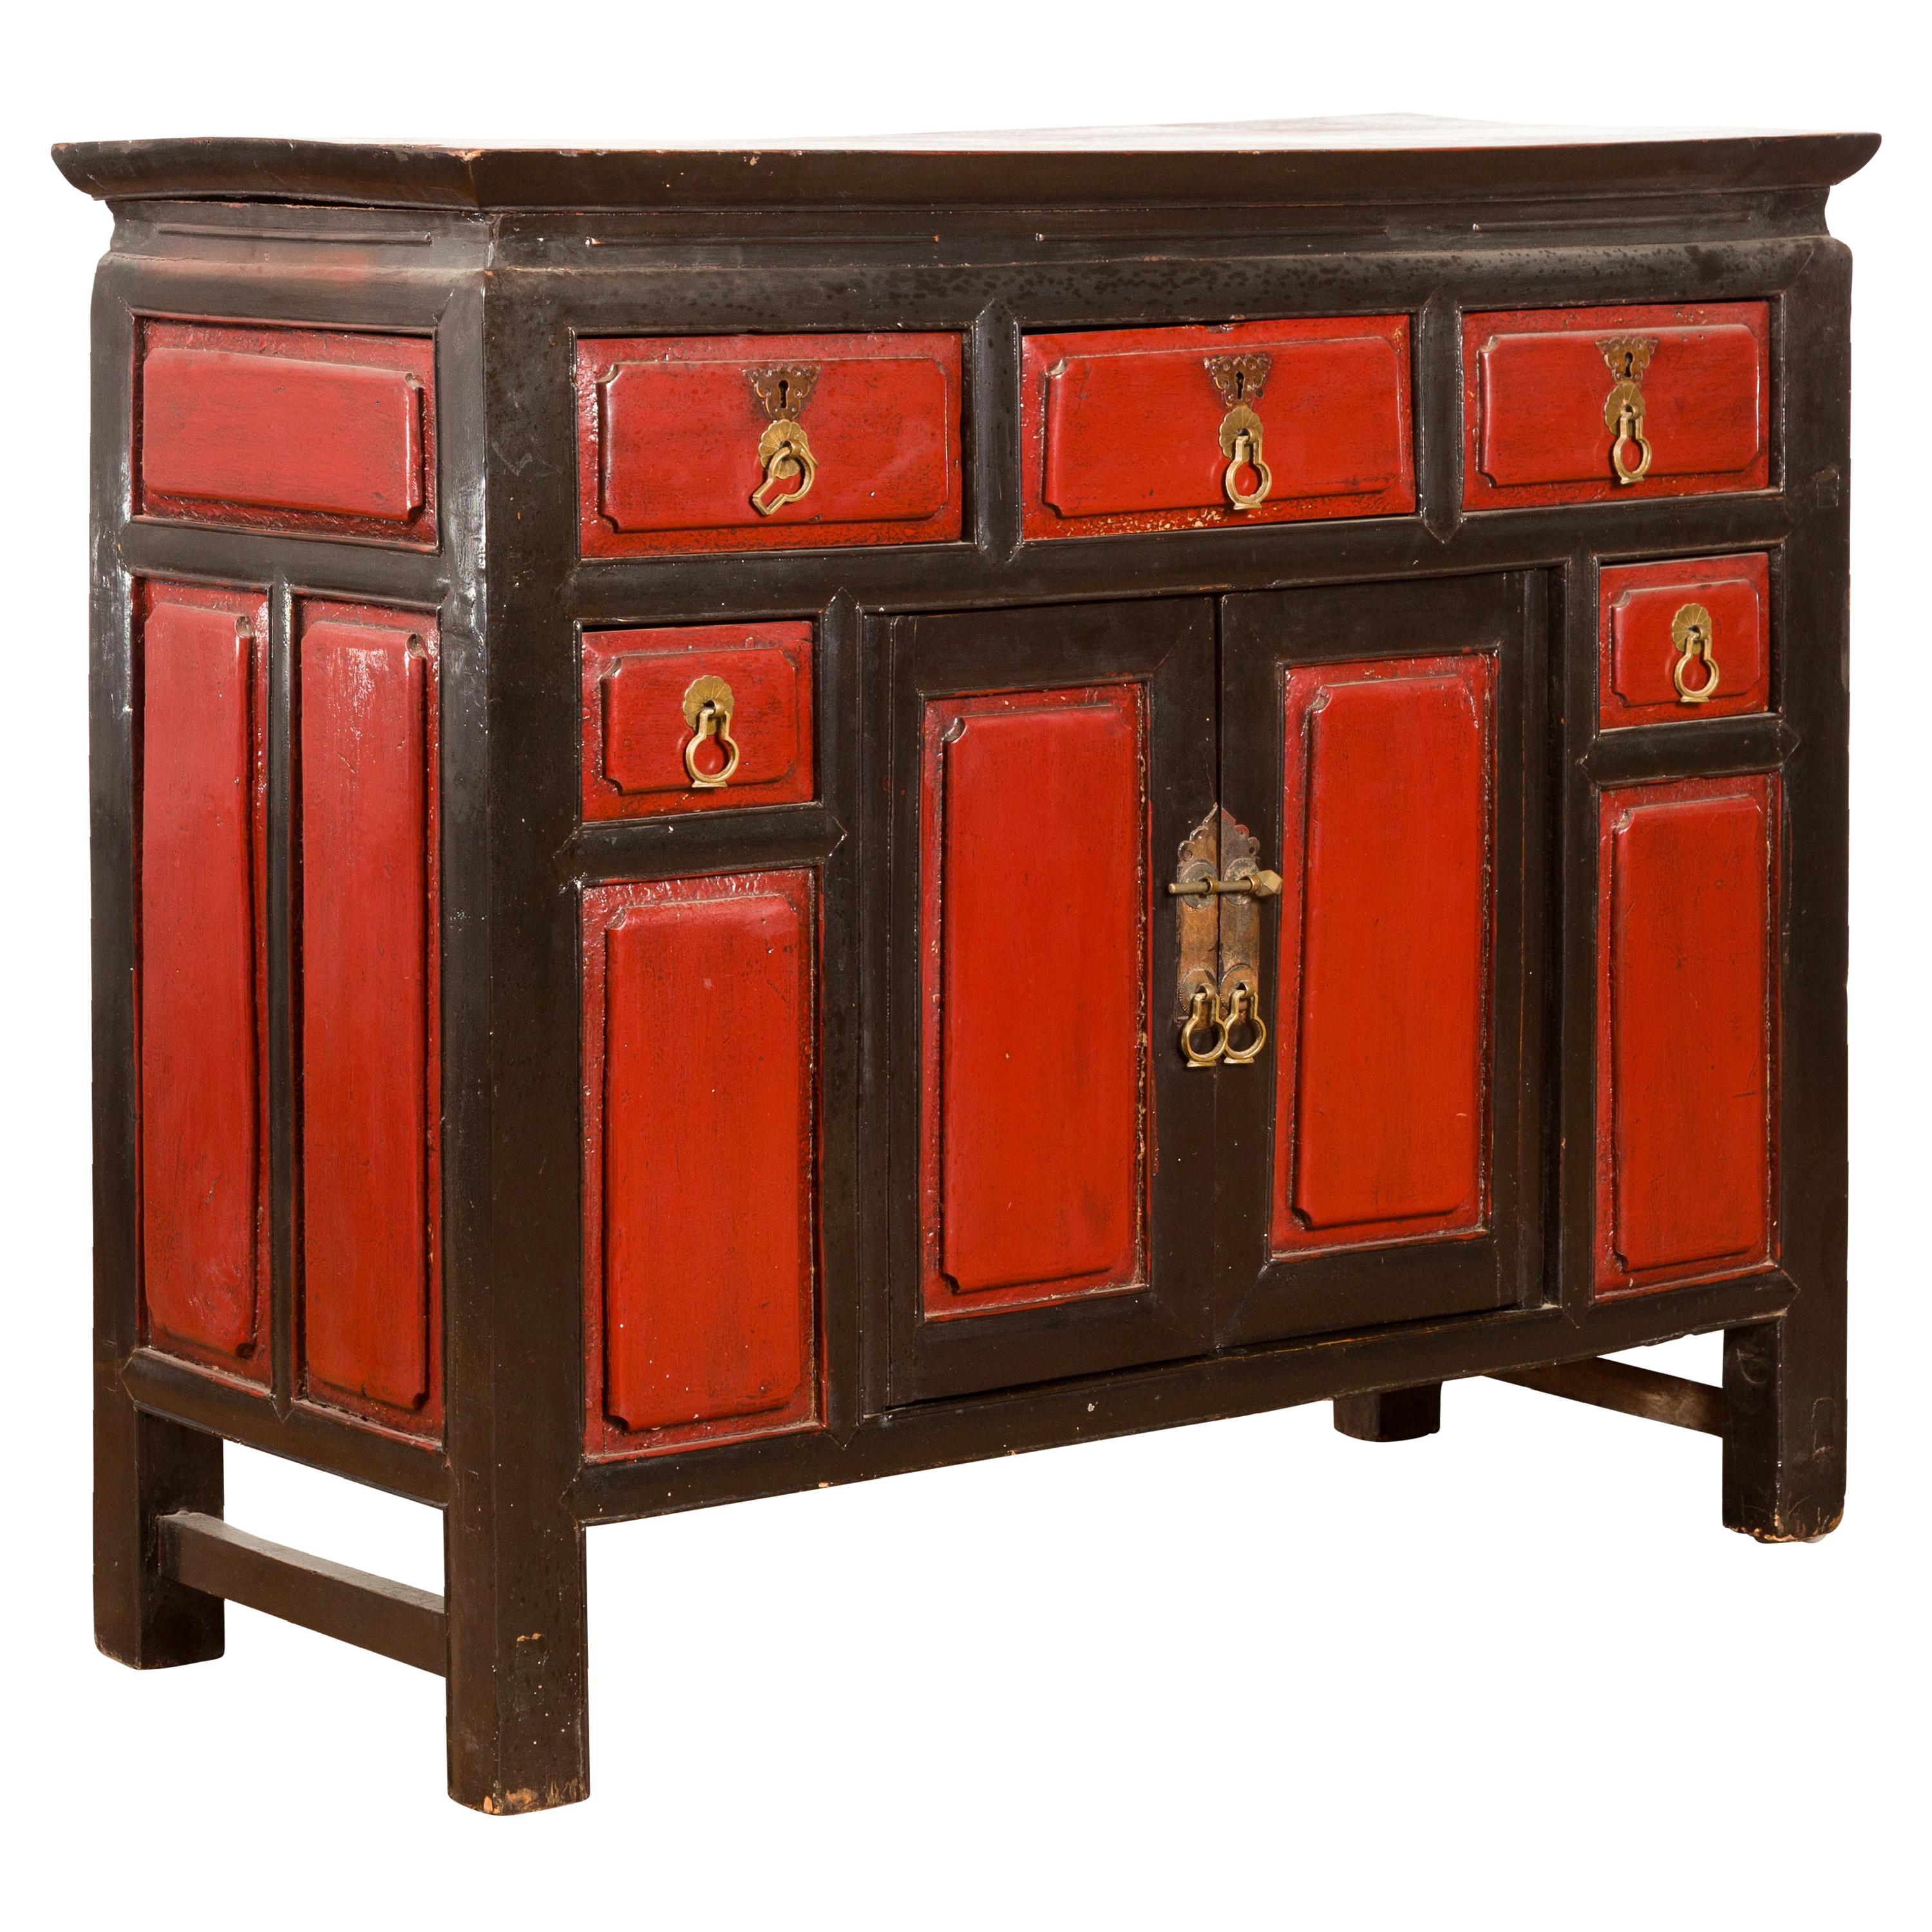 Chinese Qing Dynasty 19th Century Red and Black Lacquer Cabinet with Drawers